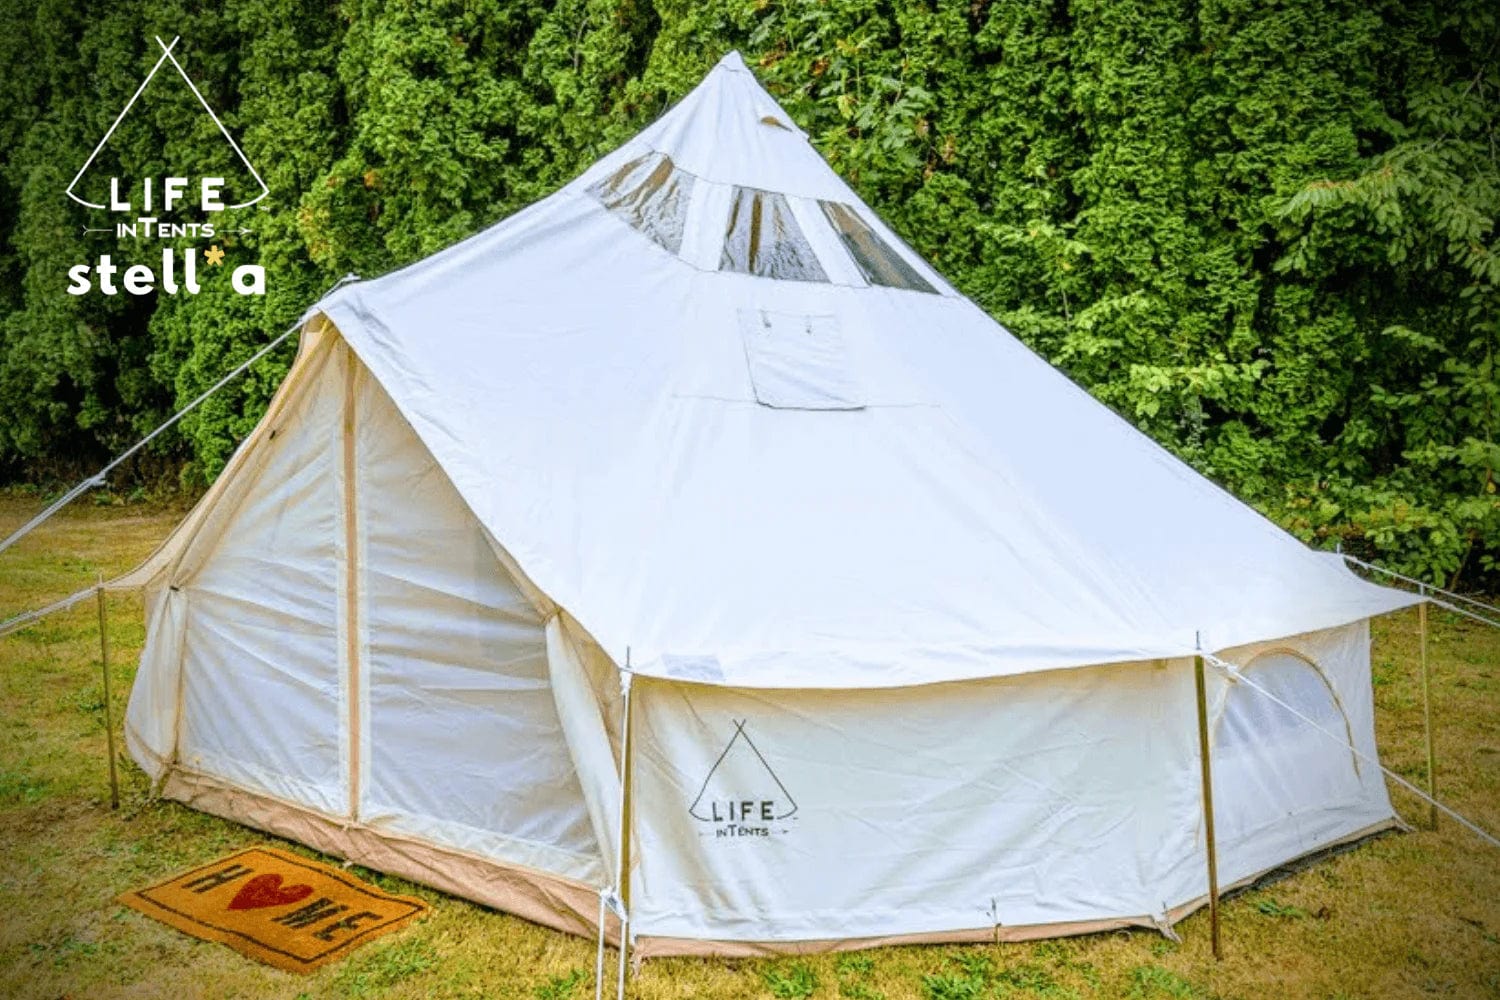 LIFE IN TENTS Bell Tents Life in Tent 16' (5M) STELLA™ STARGAZER BELL TENT-LIT16SSBT